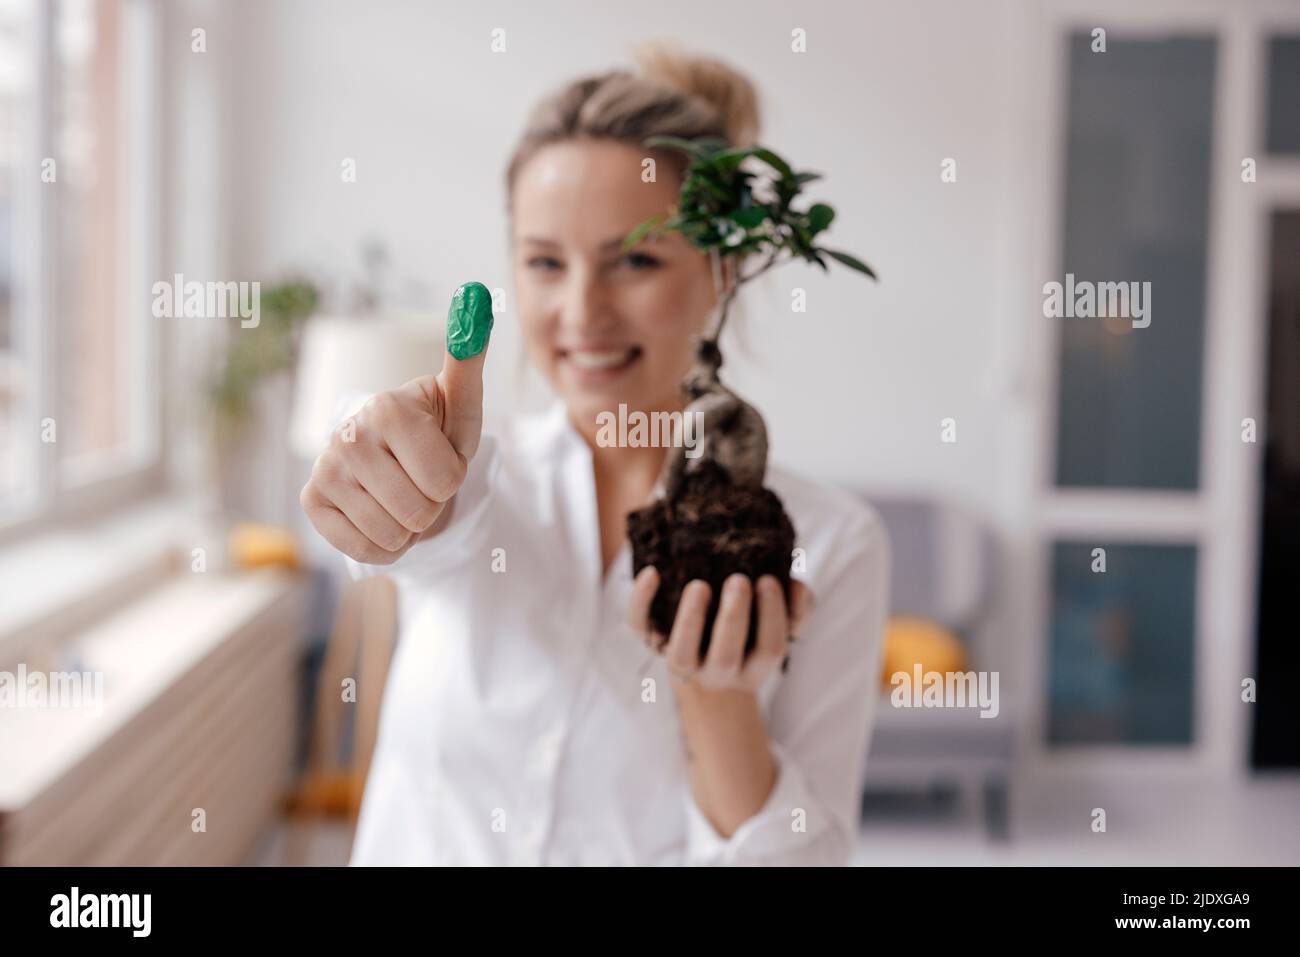 Happy businesswoman holding plant showing green thumb in office Stock Photo